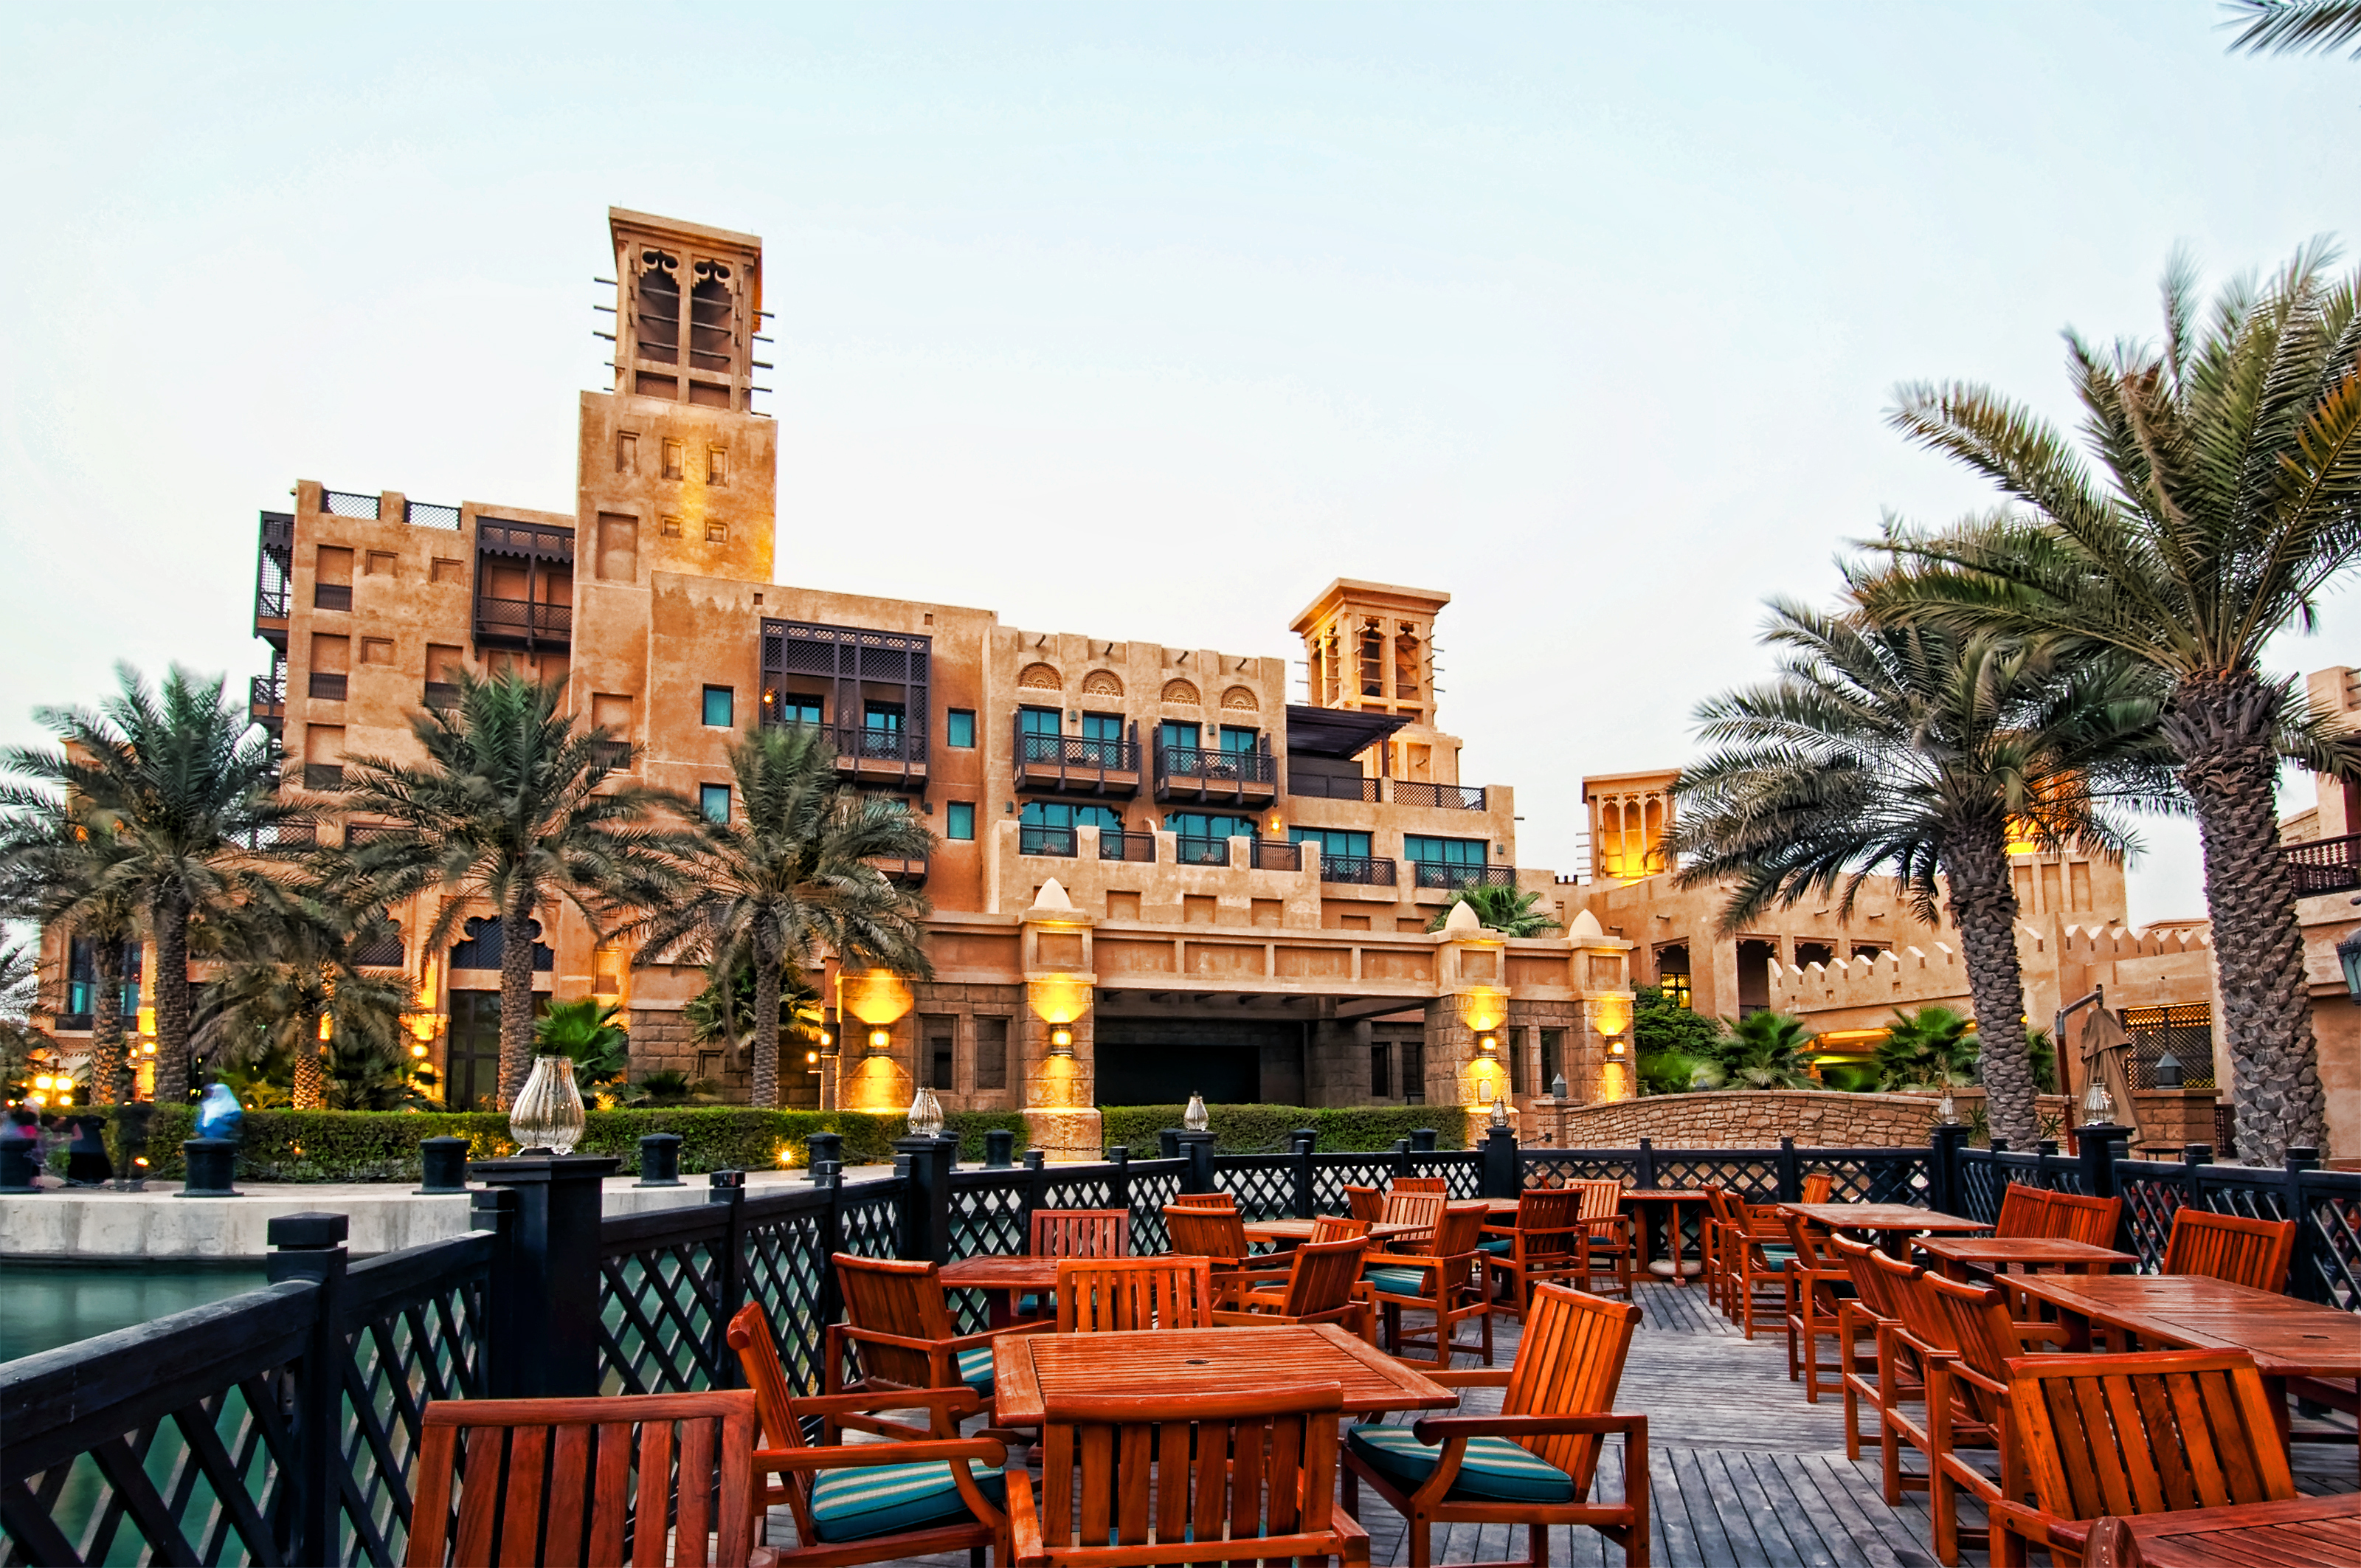 Covid-19: It is decided to reduce social distancing in restaurants and cafes in Dubai